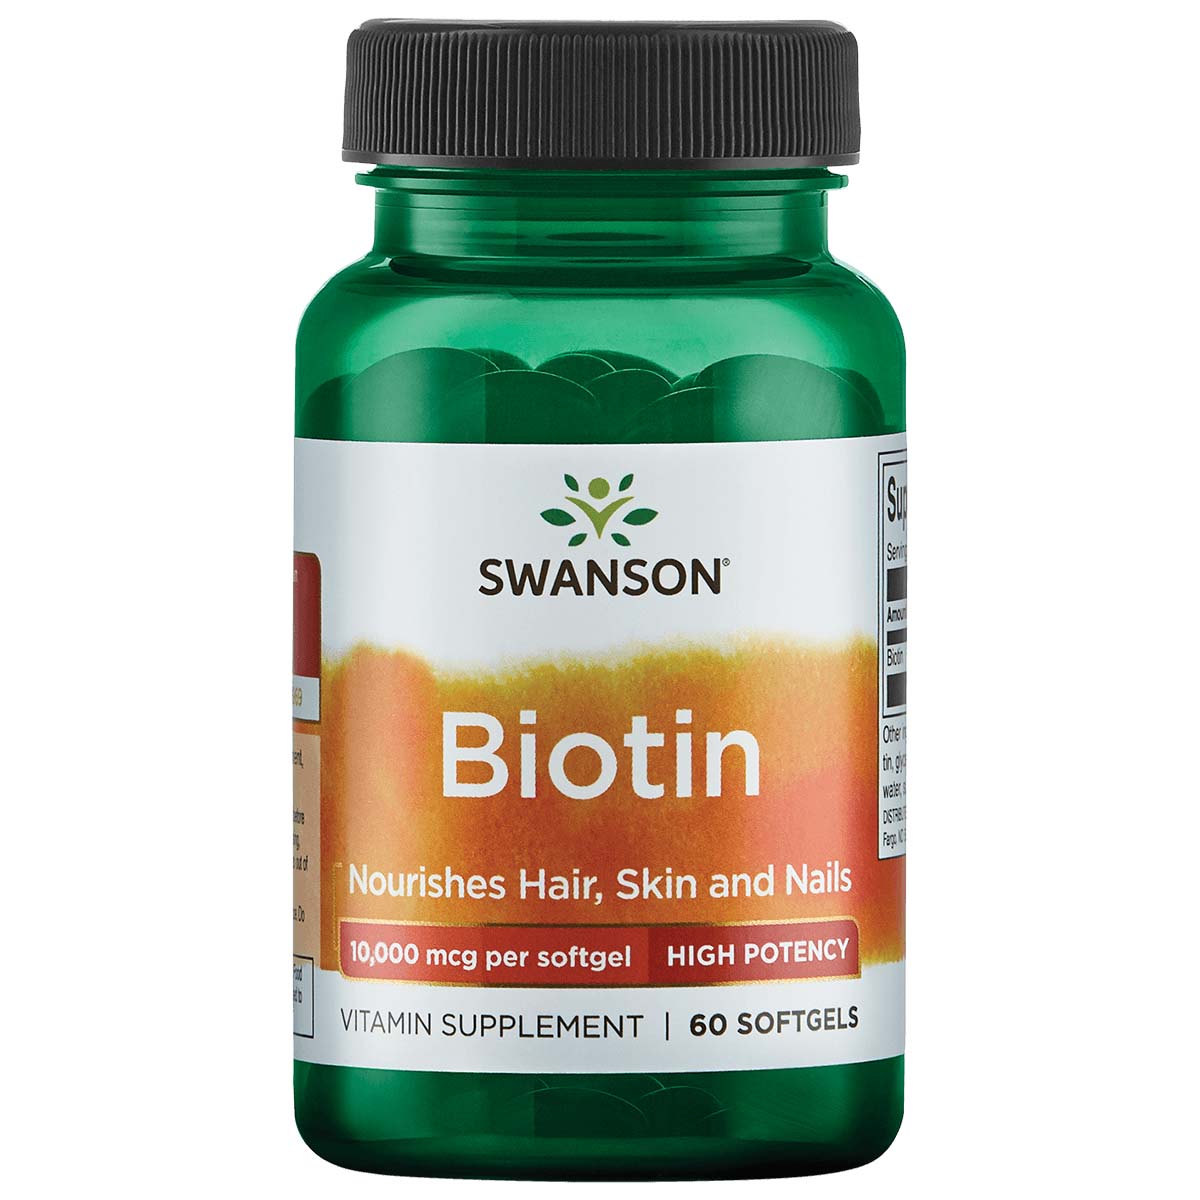 Swanson Biotin Timed Release 60 Tablets 10000 mcg